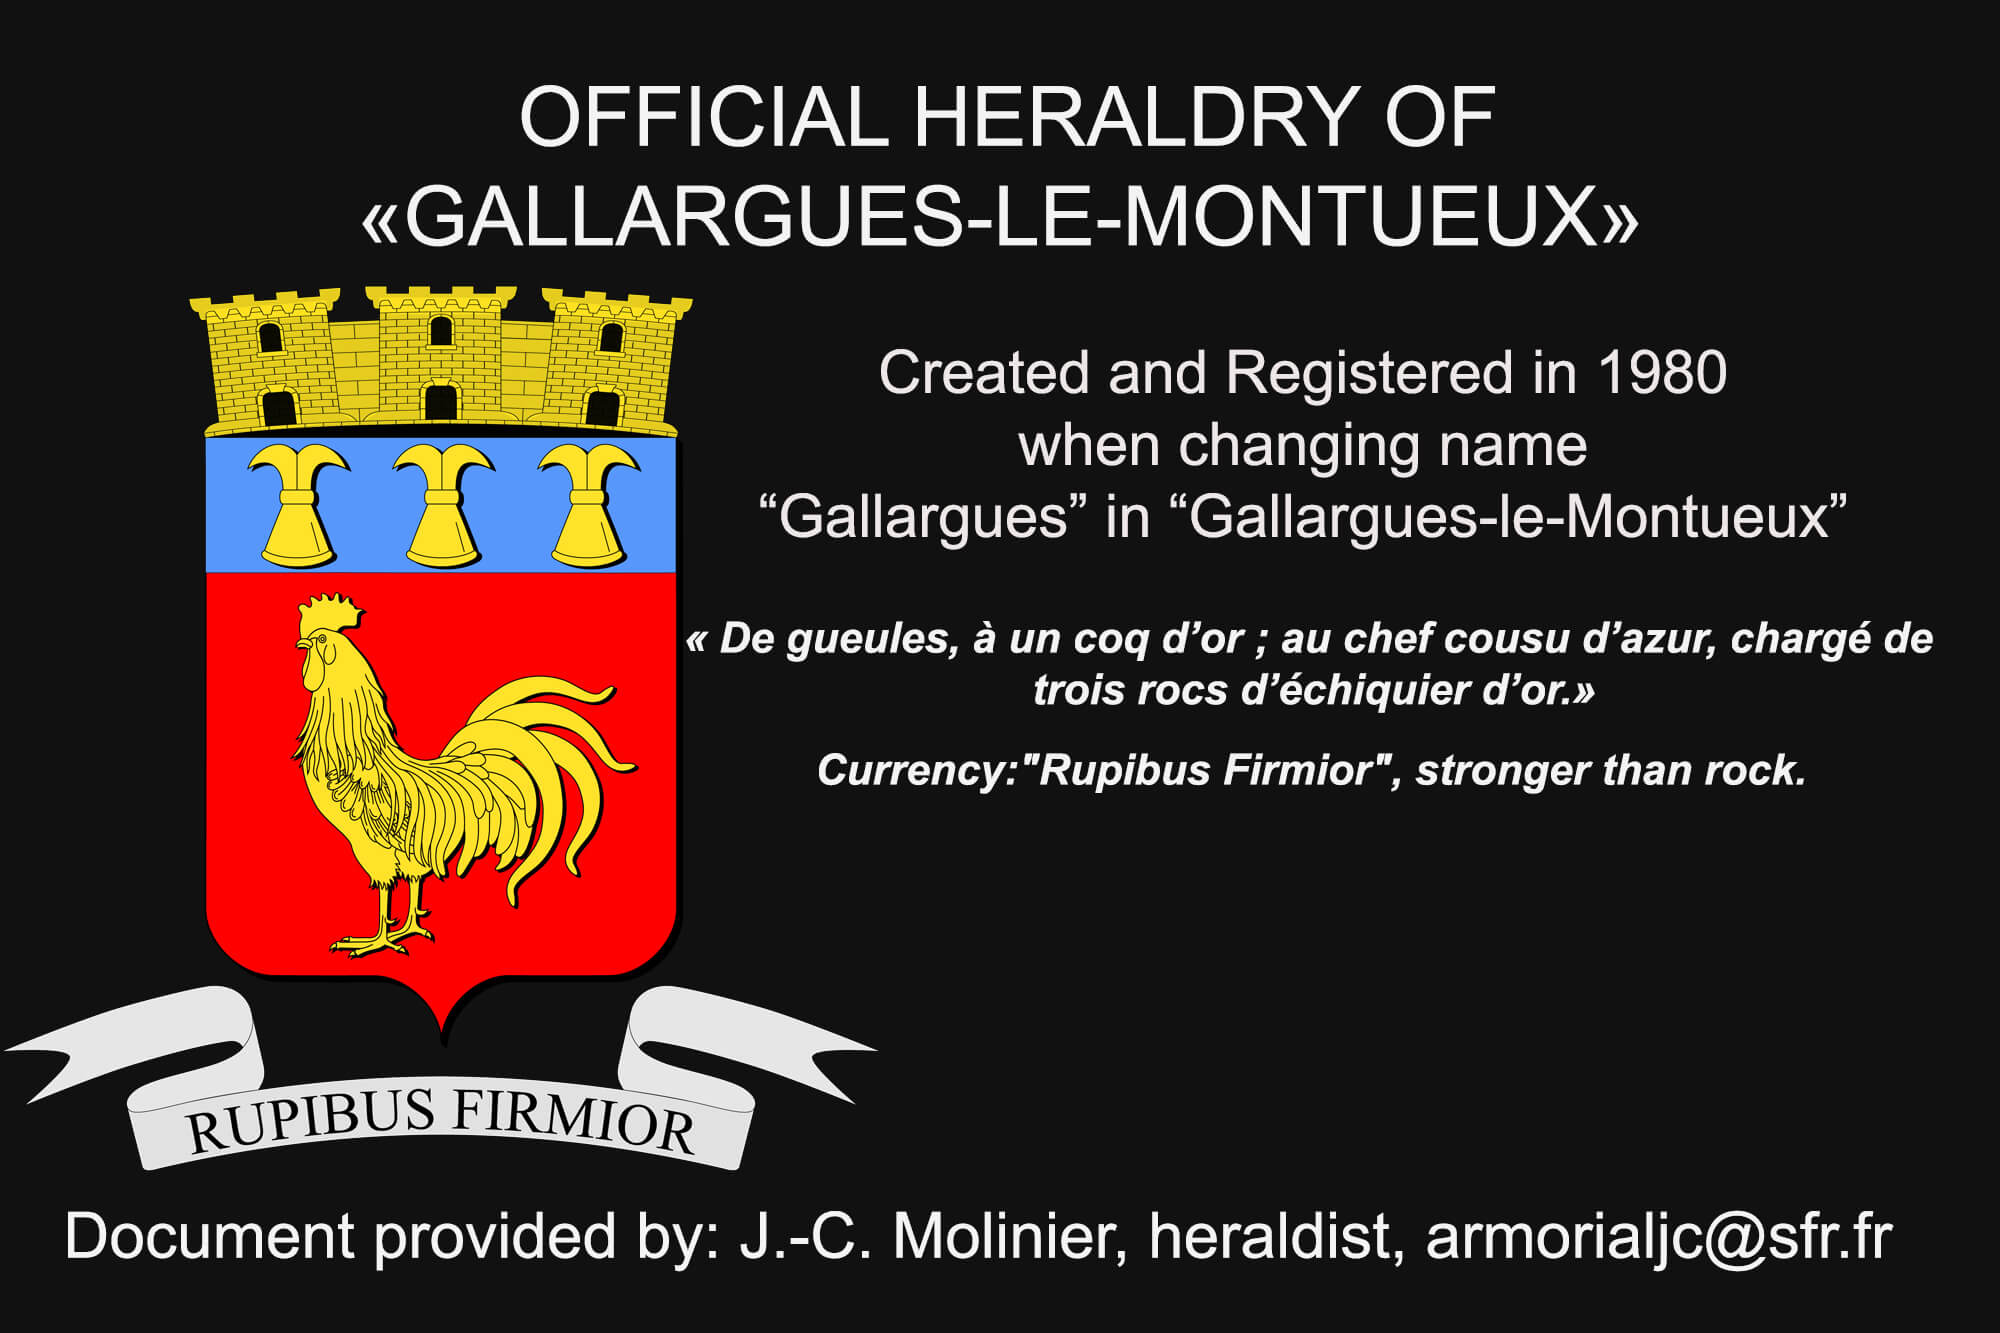 Coat of arms created by the municipality in the 1980s - Gallargues becomes Gallargues-le-Montueux